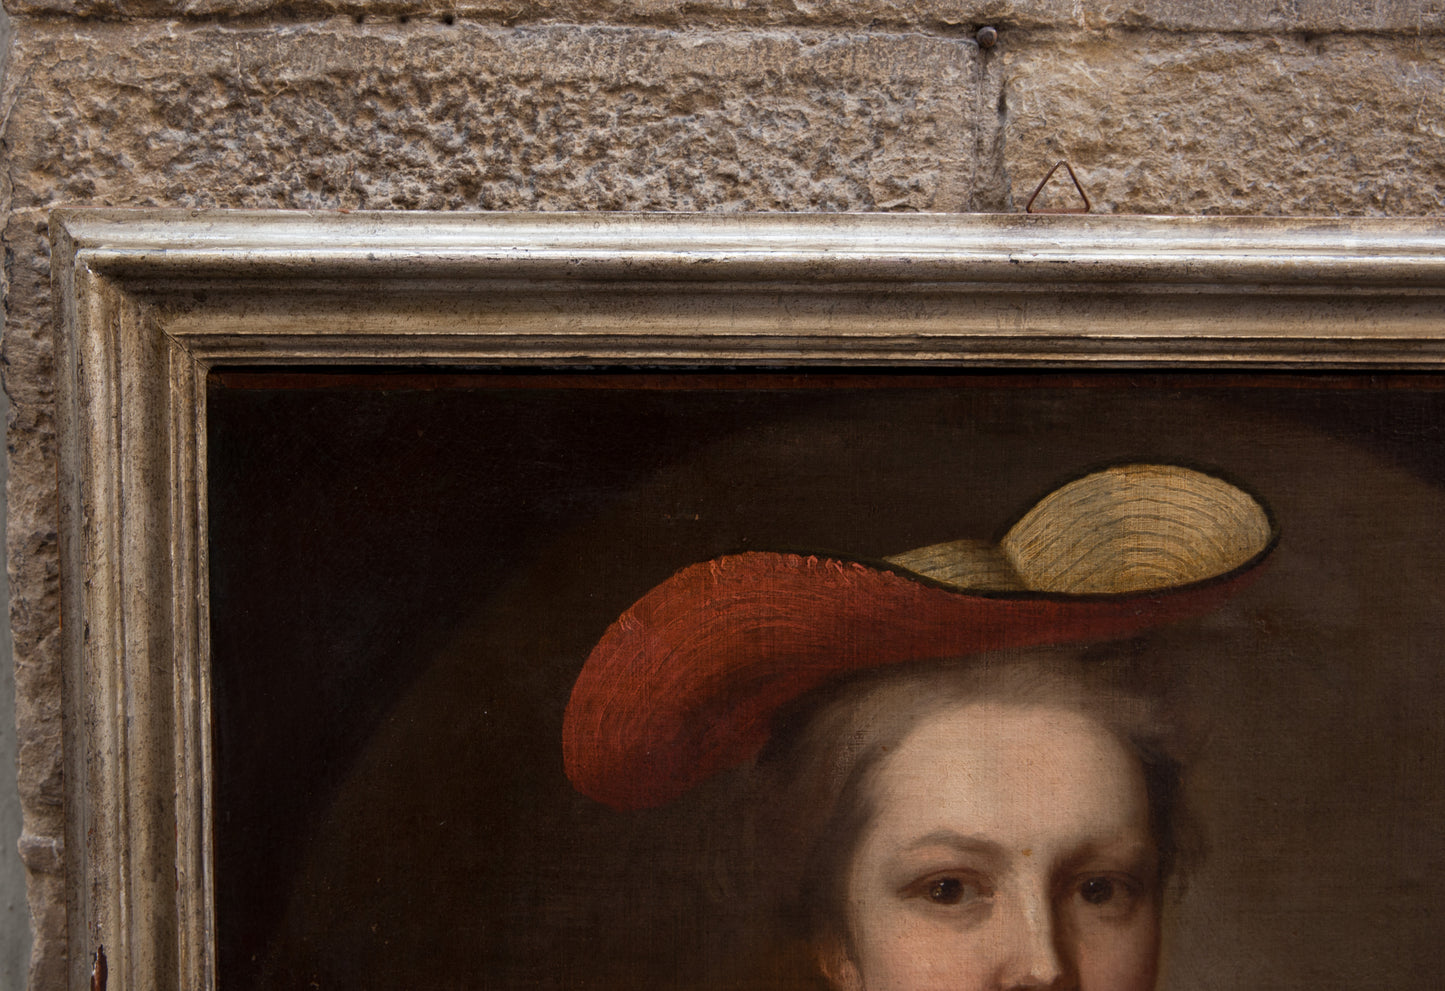 Portrait of Young English aristocrat with Straw Hat. English School circa 1720